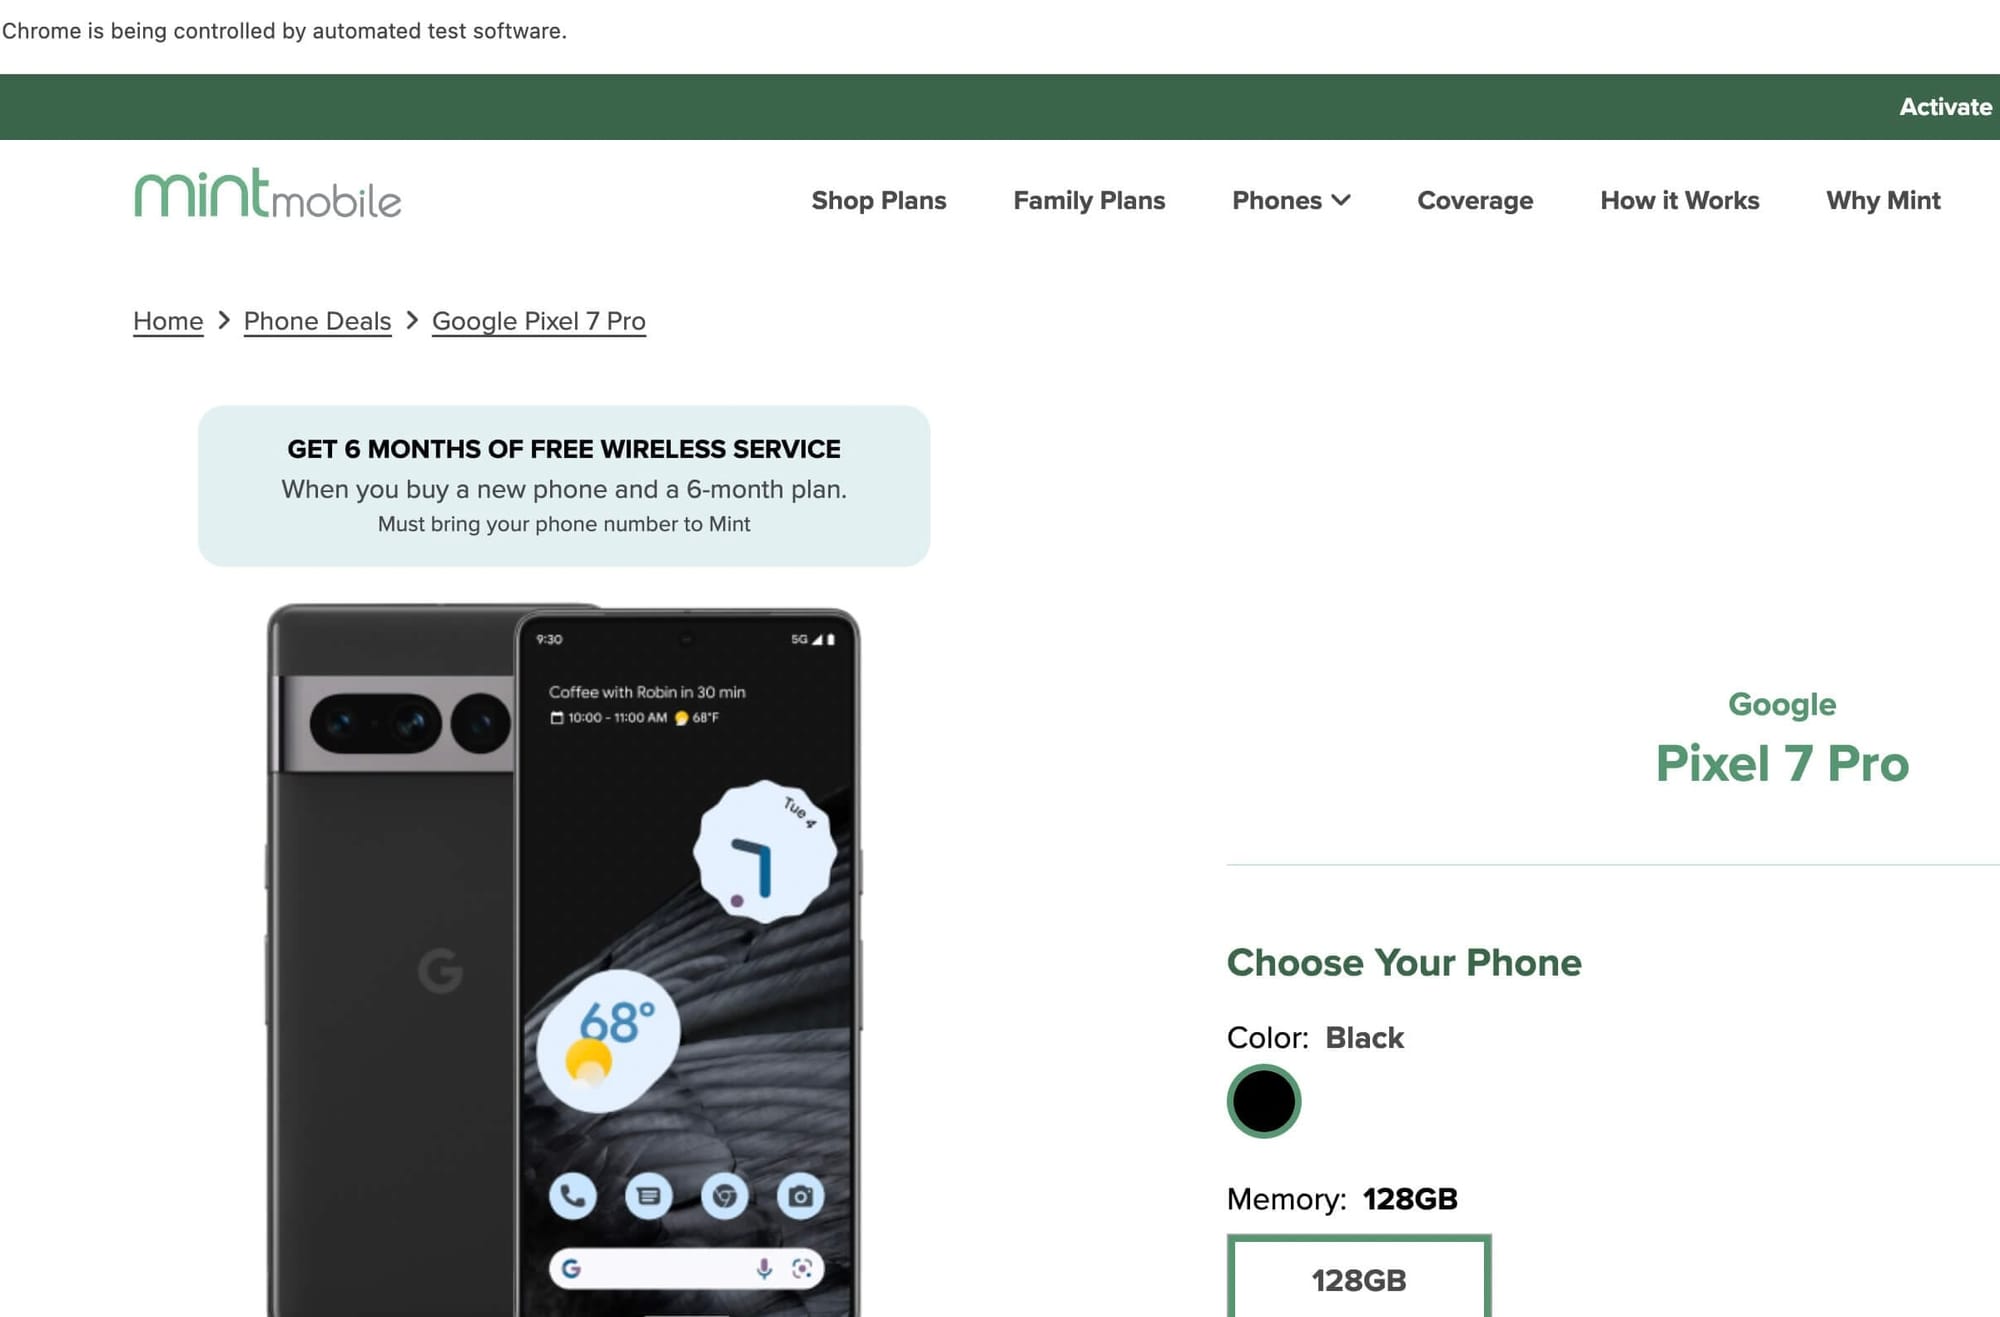 Using Selenium to open a Chrome browser and navigate to the Mint Mobile product page